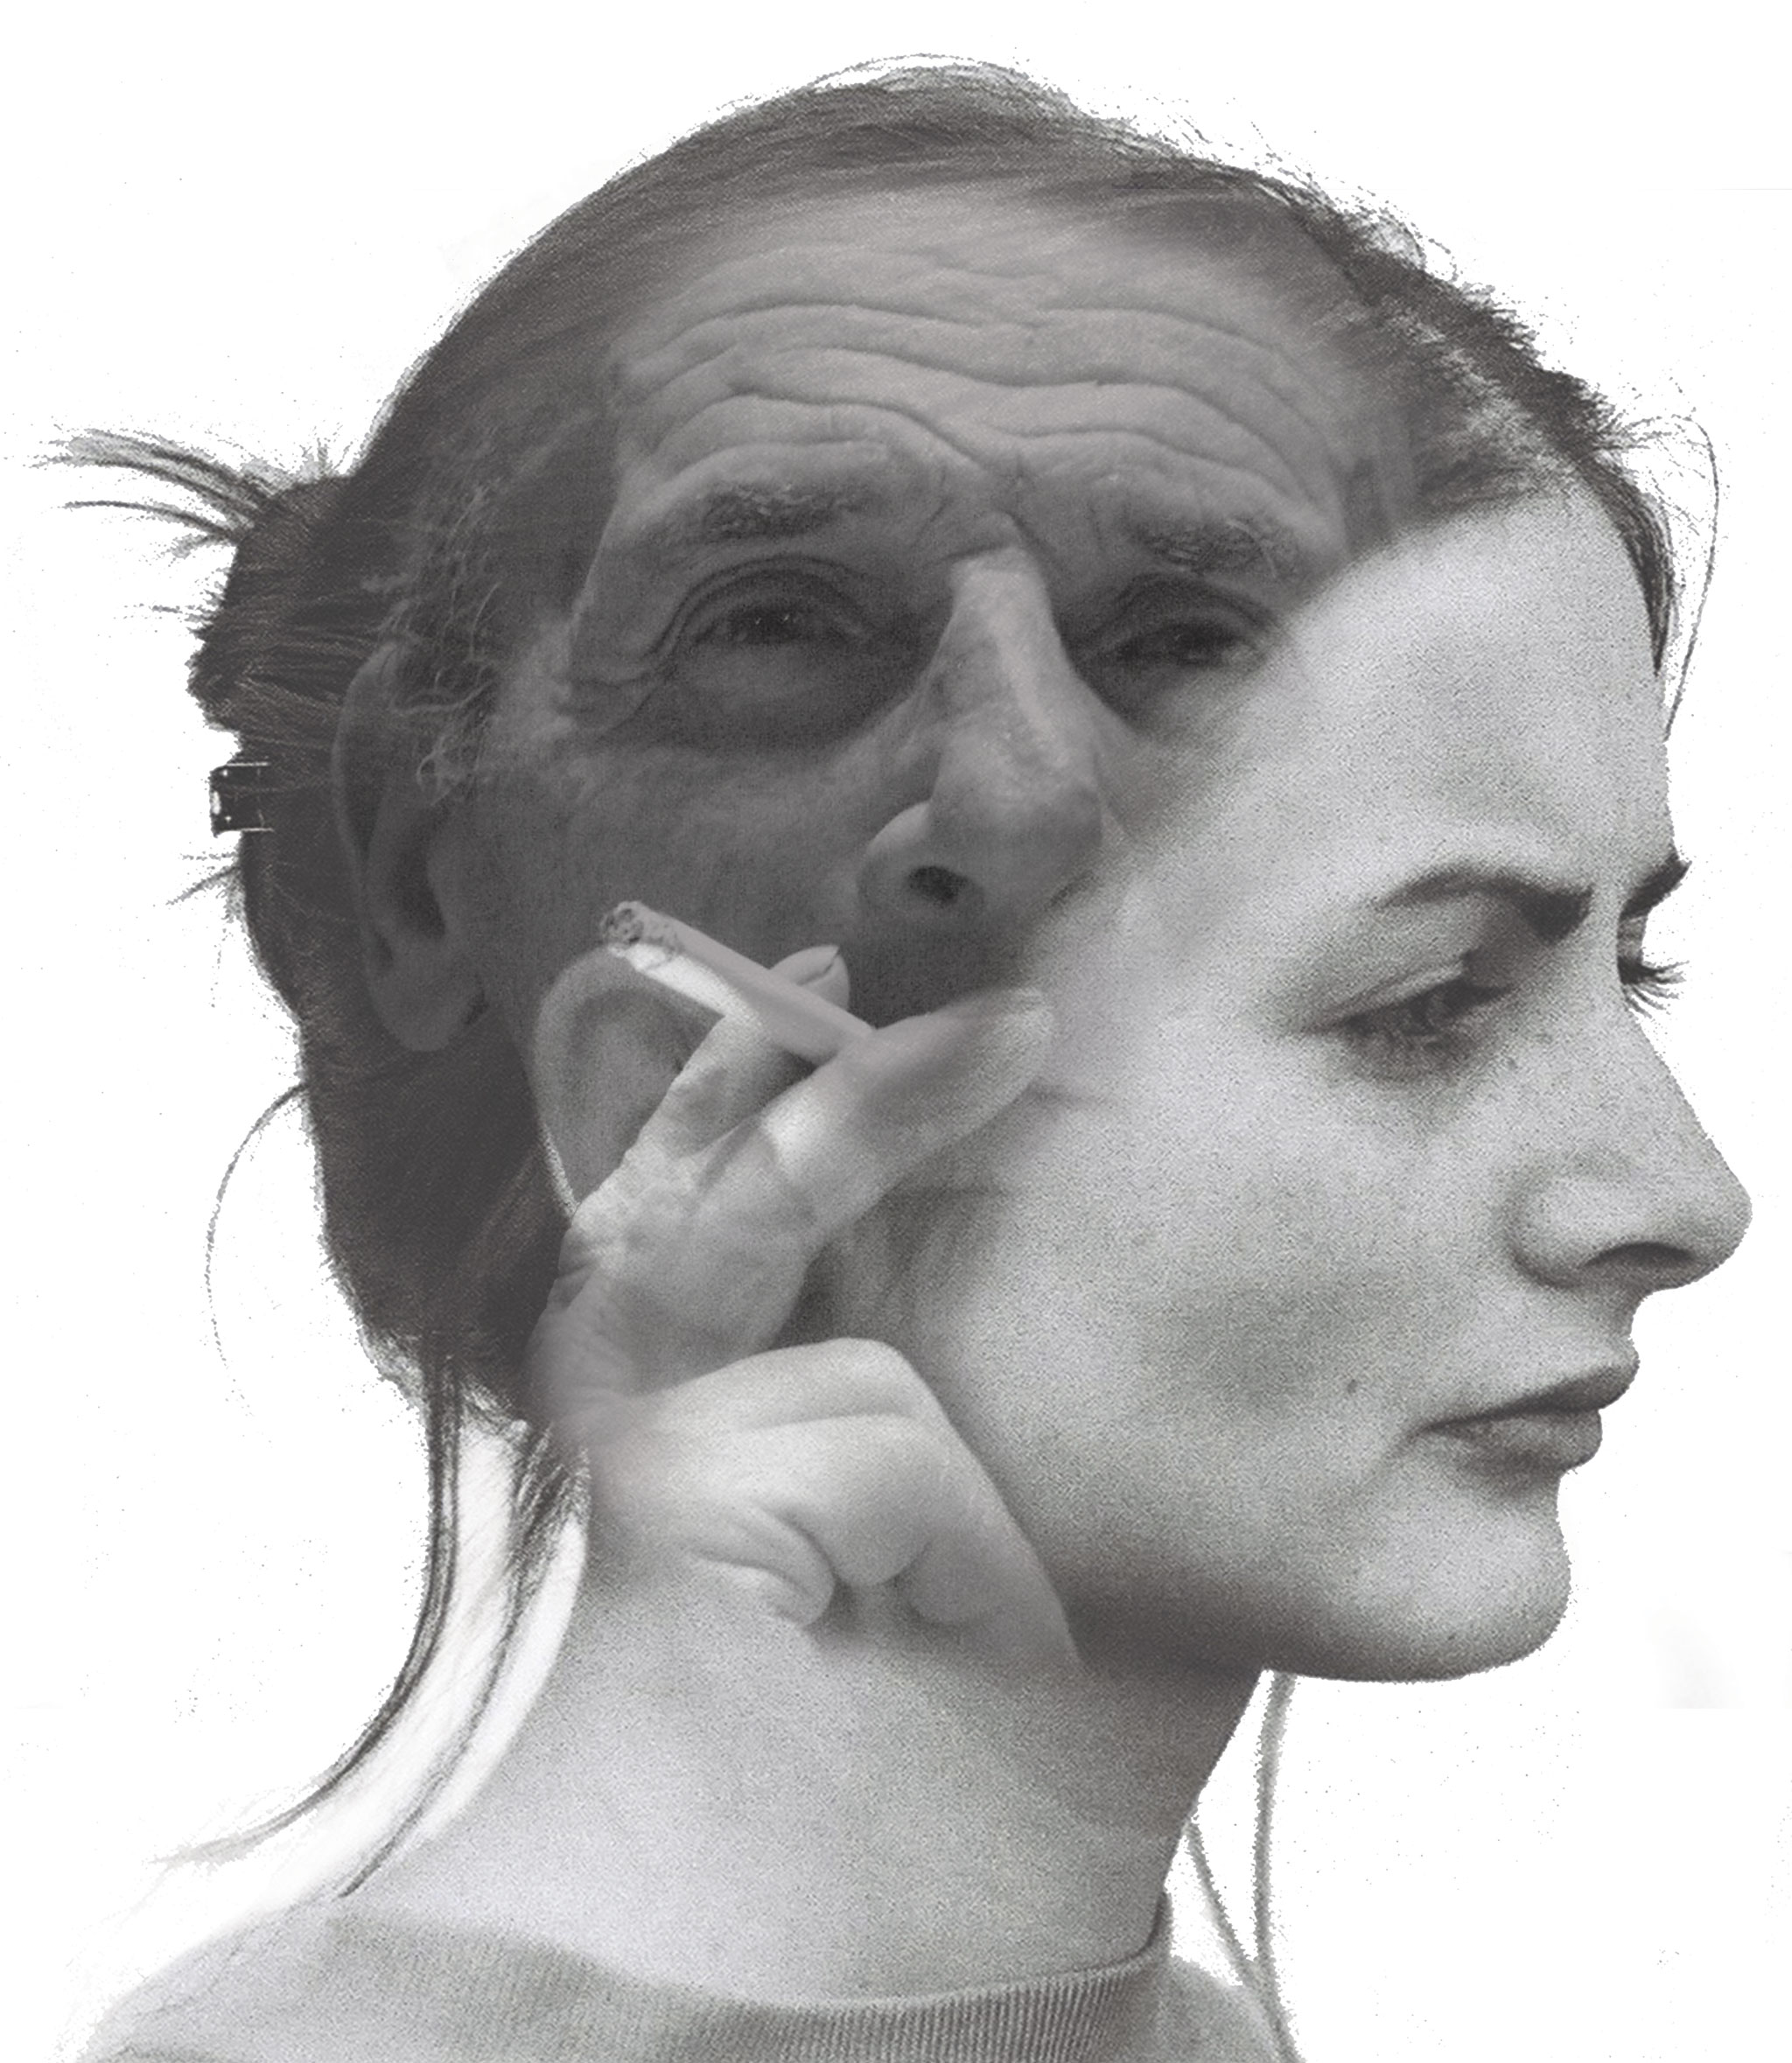 Double exposure image of a woman and a man smoking